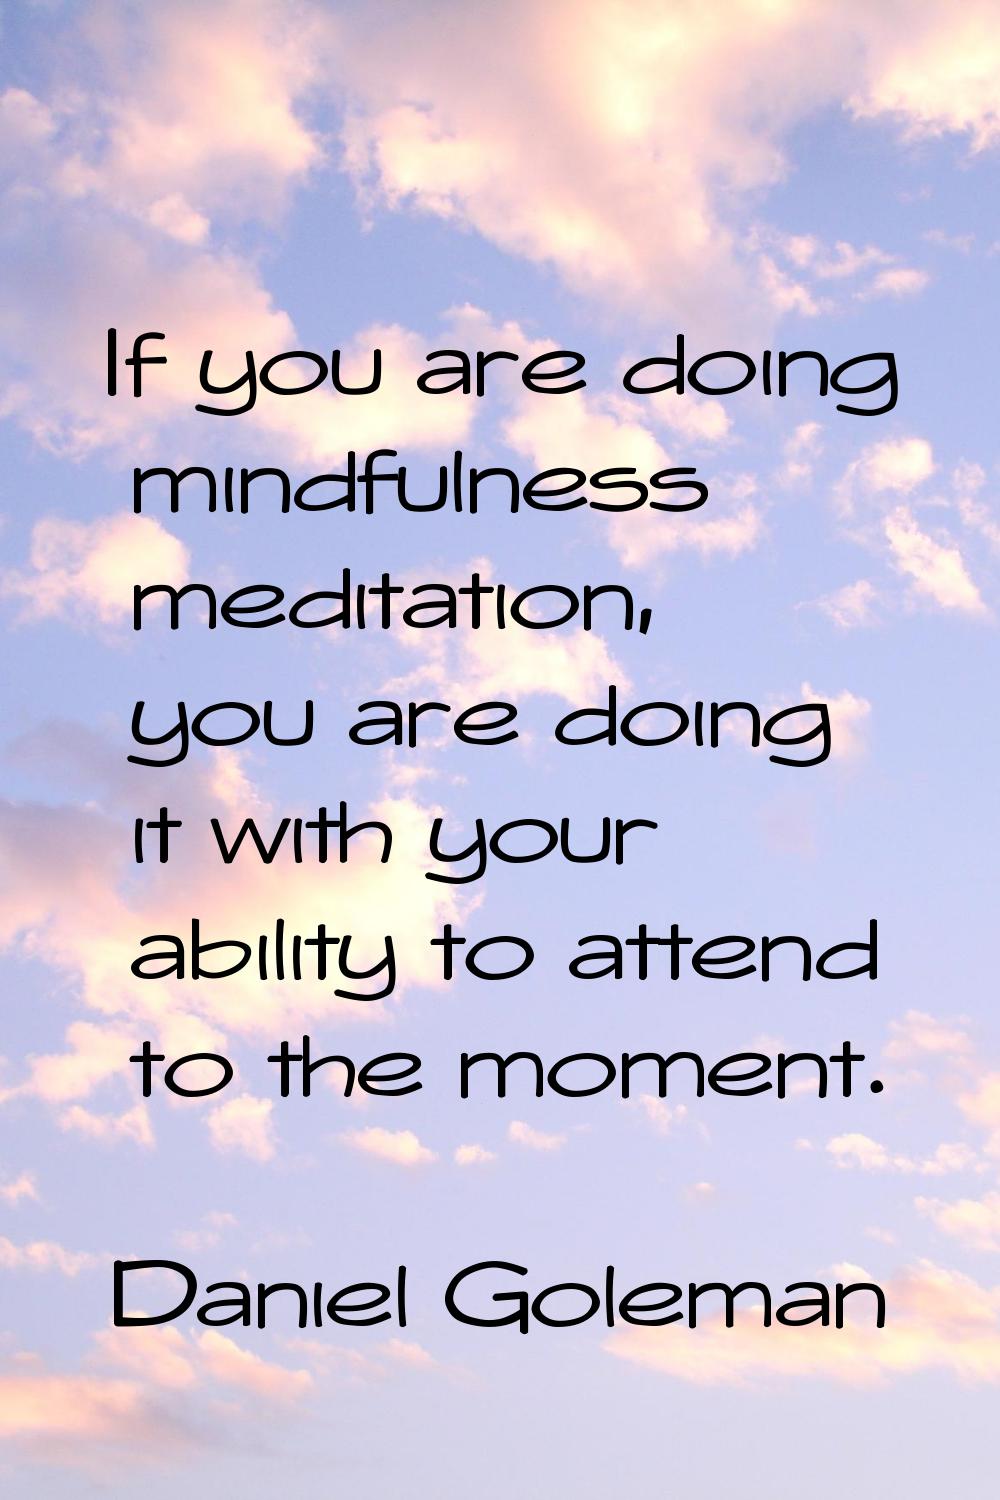 If you are doing mindfulness meditation, you are doing it with your ability to attend to the moment